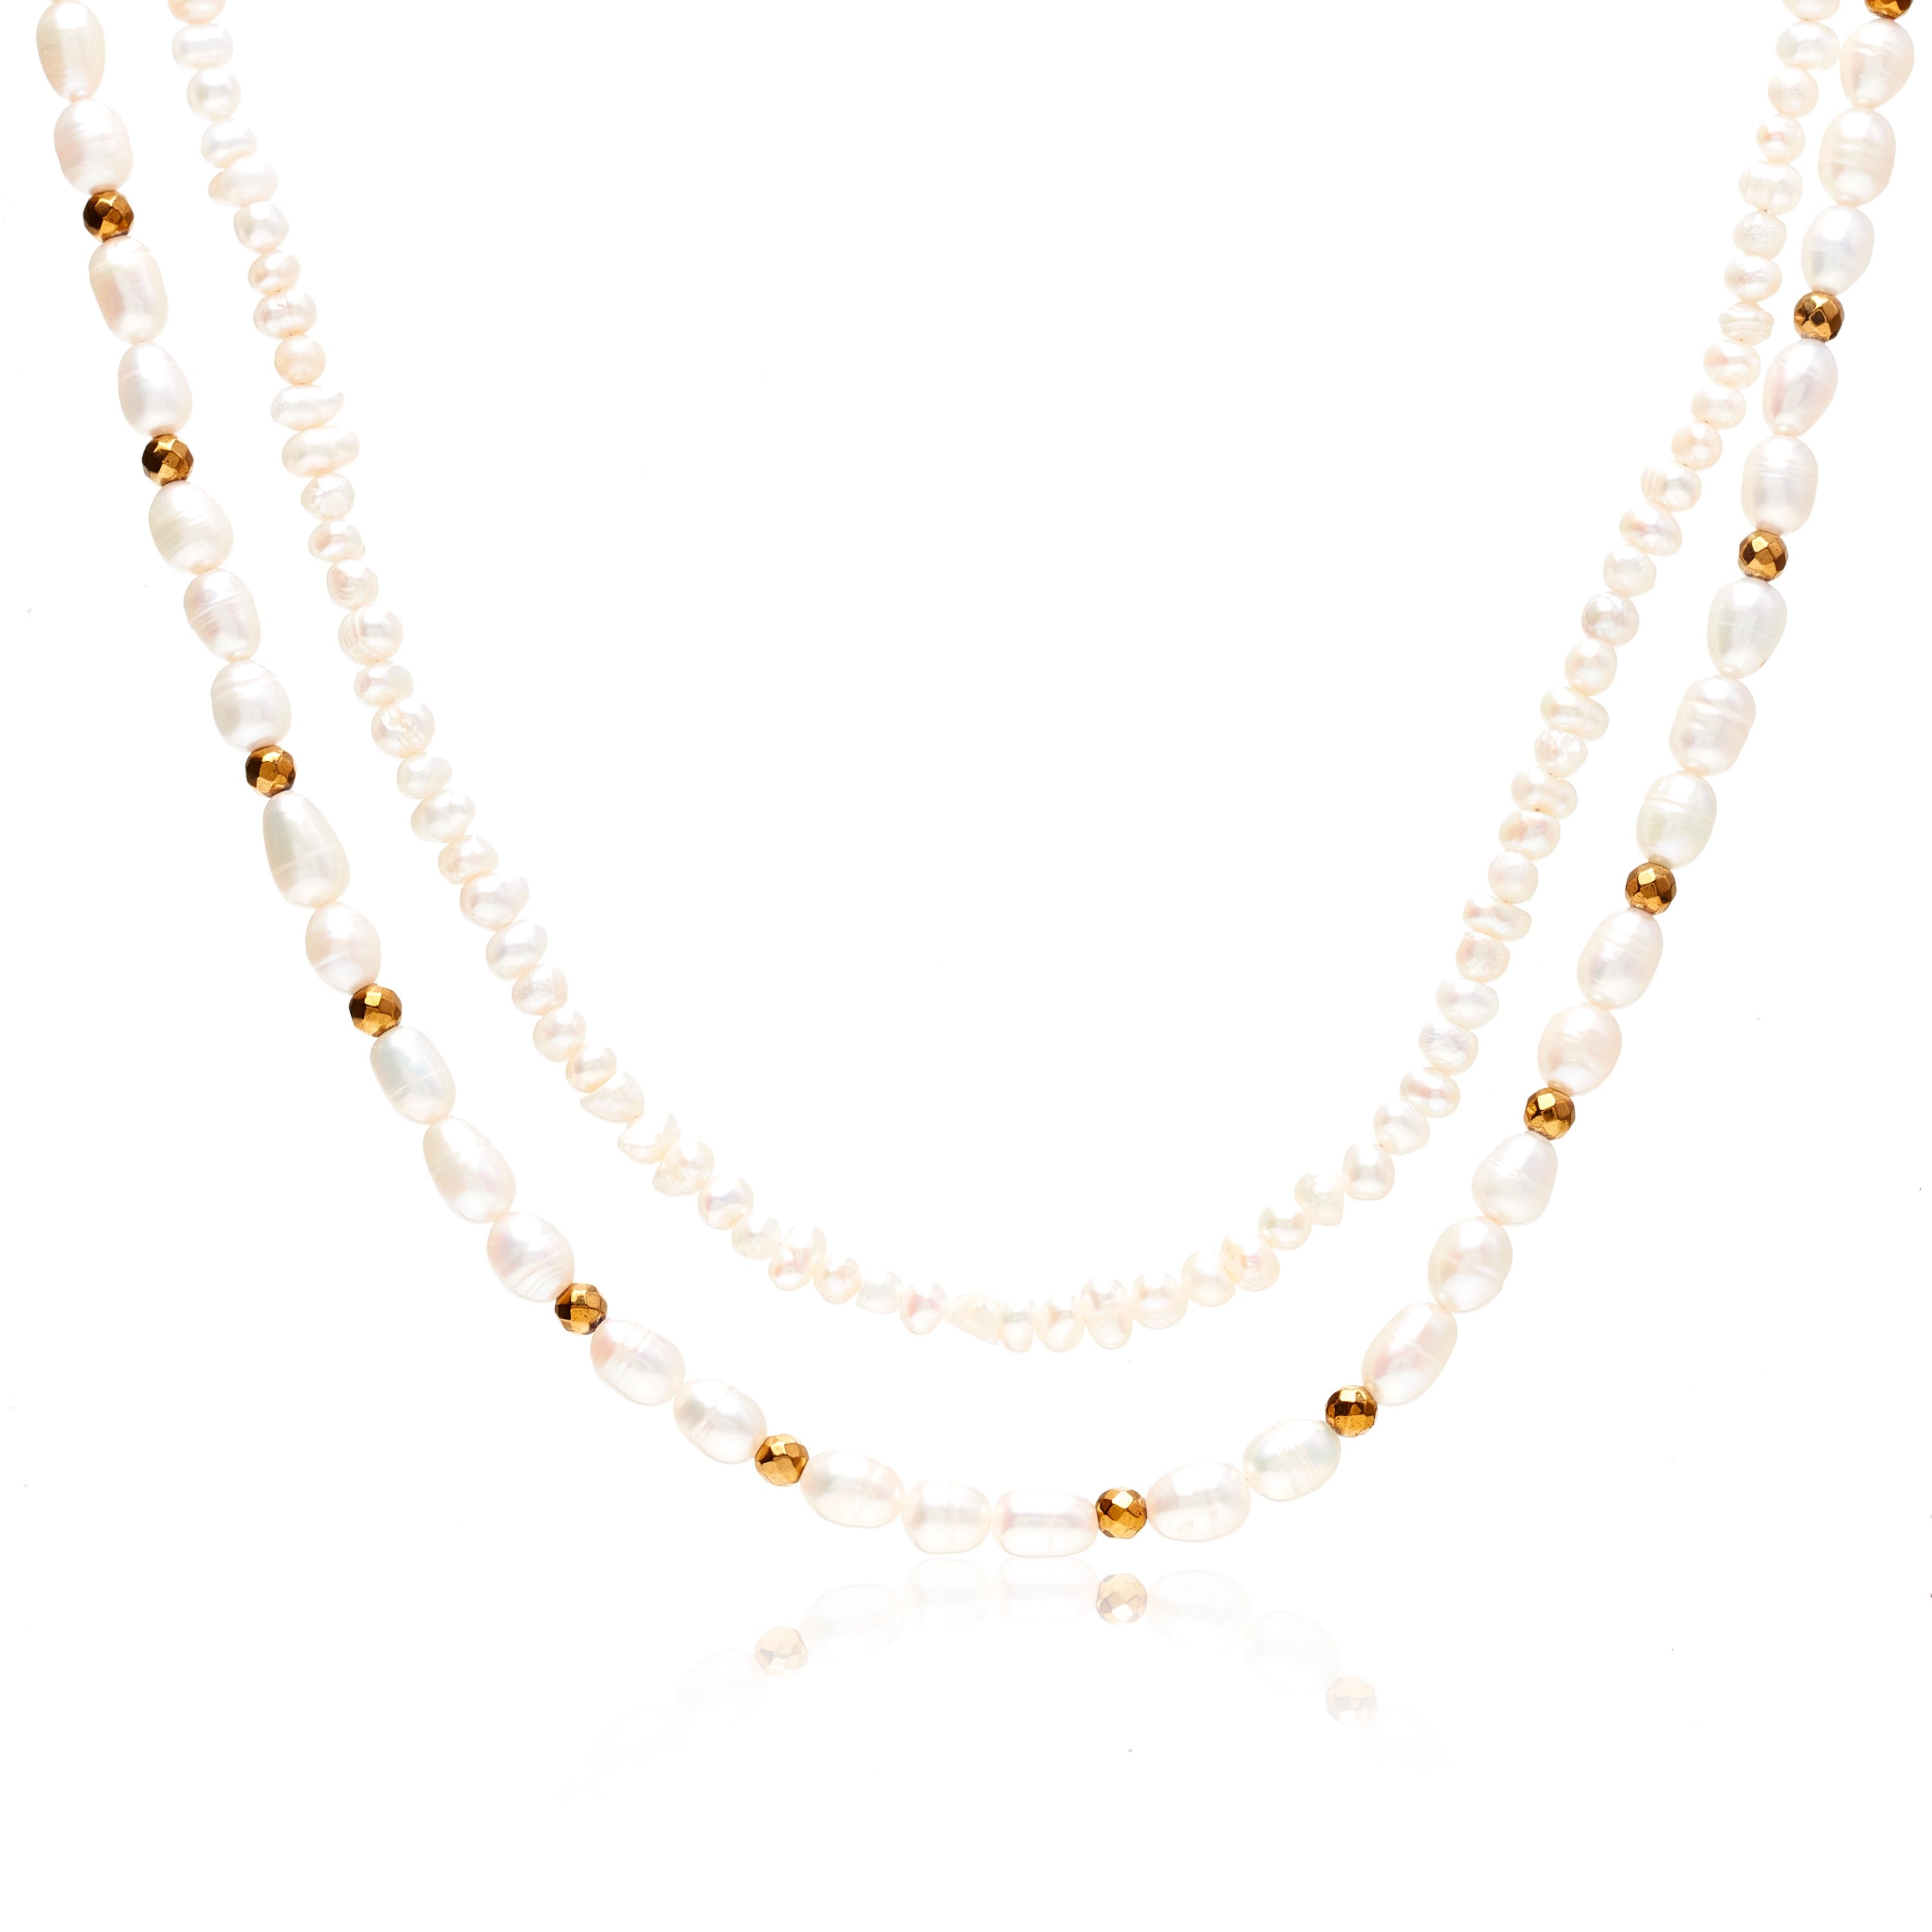 Silk & Steel Jewellery How to style your pearls like a minimalist - Santorini and La Mer Pearl Necklaces